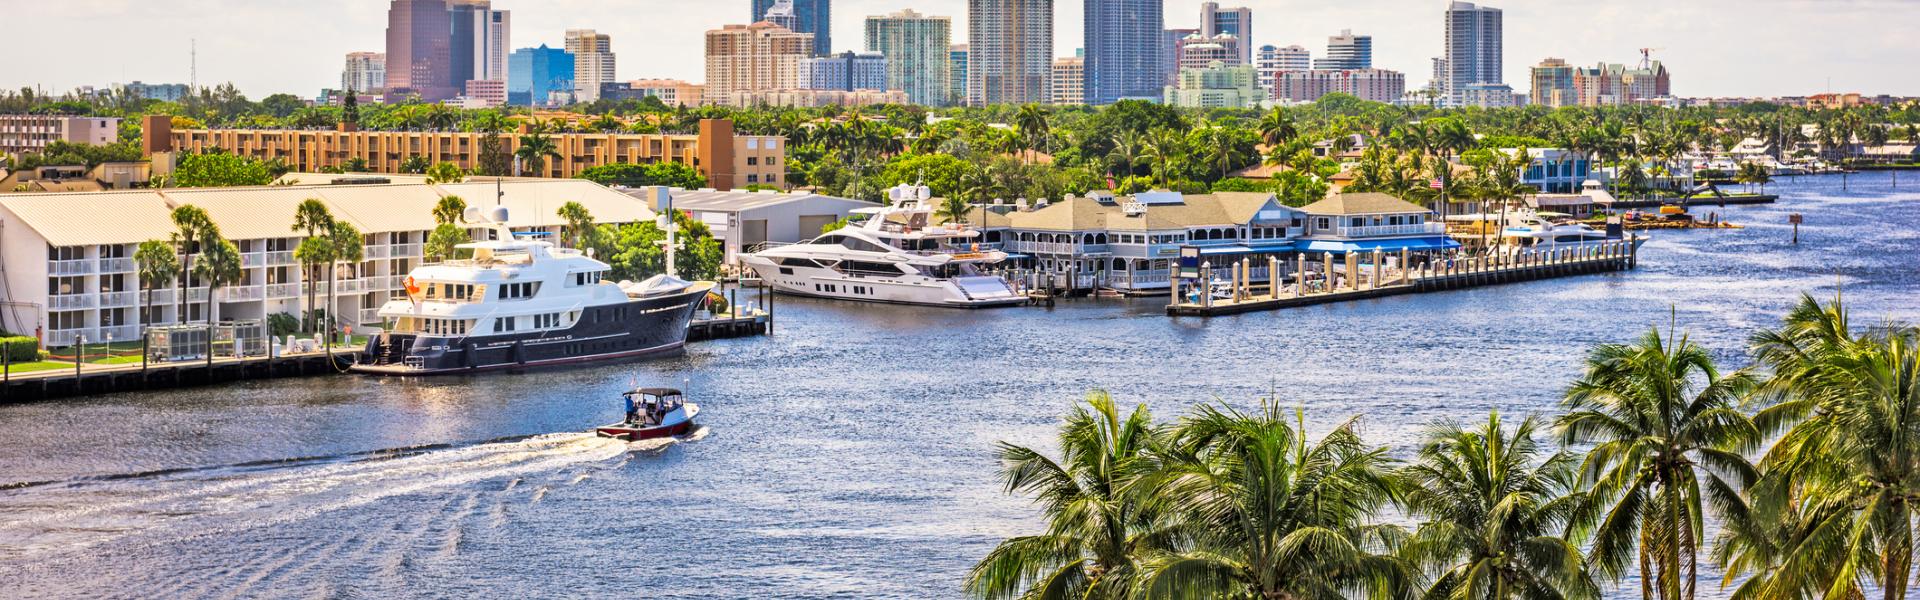 Holiday lettings & accommodation in Fort Lauderdale - Wimdu